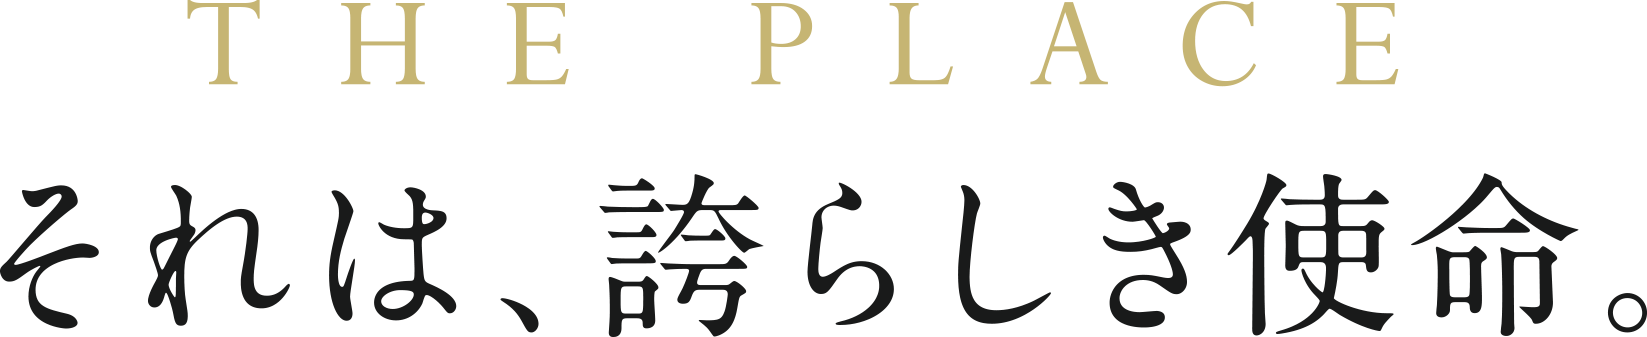 THE PLACE それは、誇らしき使命。